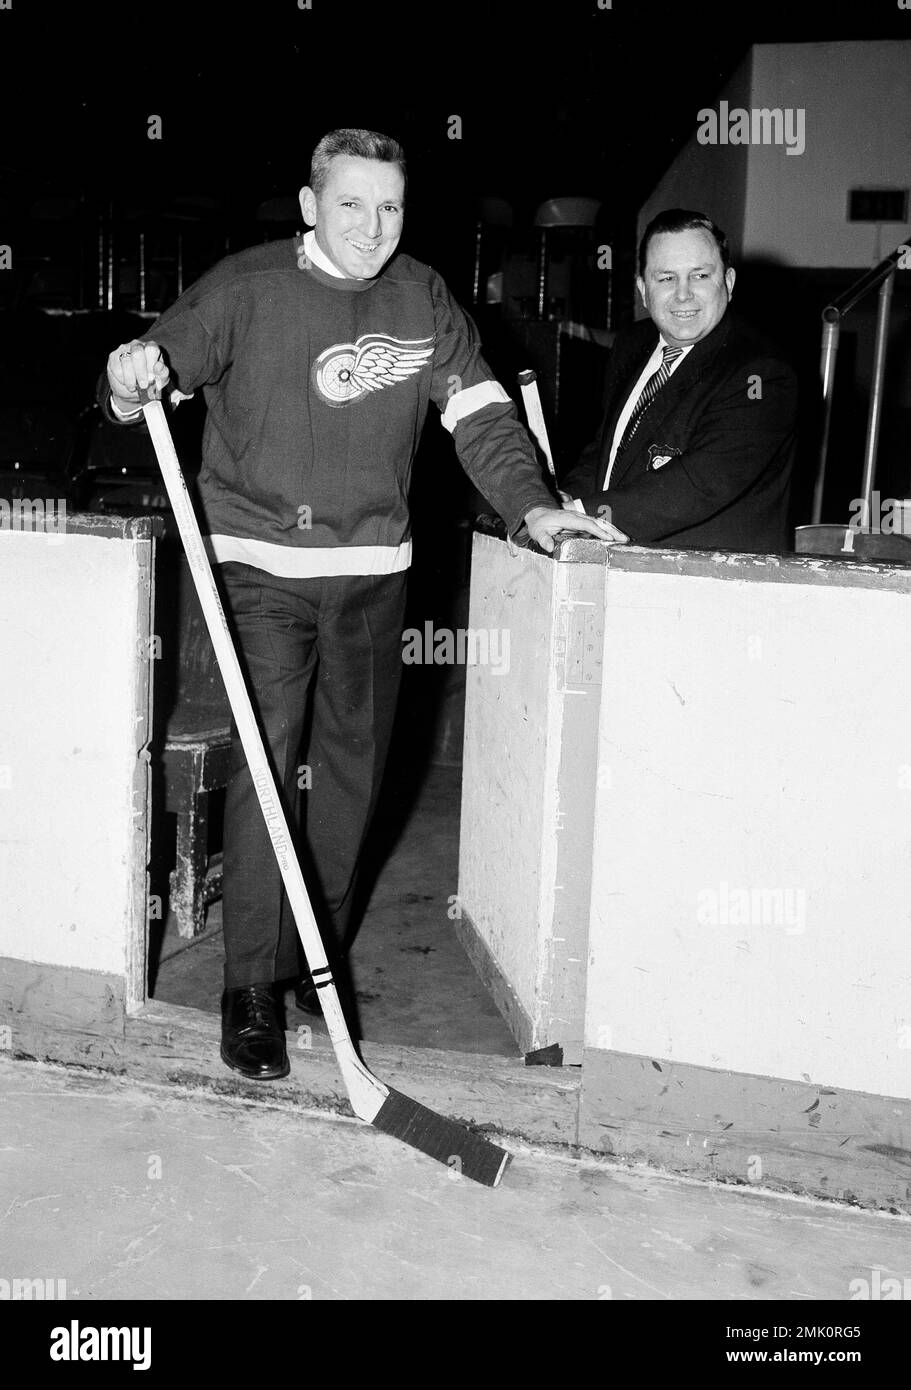 Sid Abel, left, a Detroit Red Wings player from 1938 to 1952, inspects the ice at Olympia Stadium in Detroit, Jan